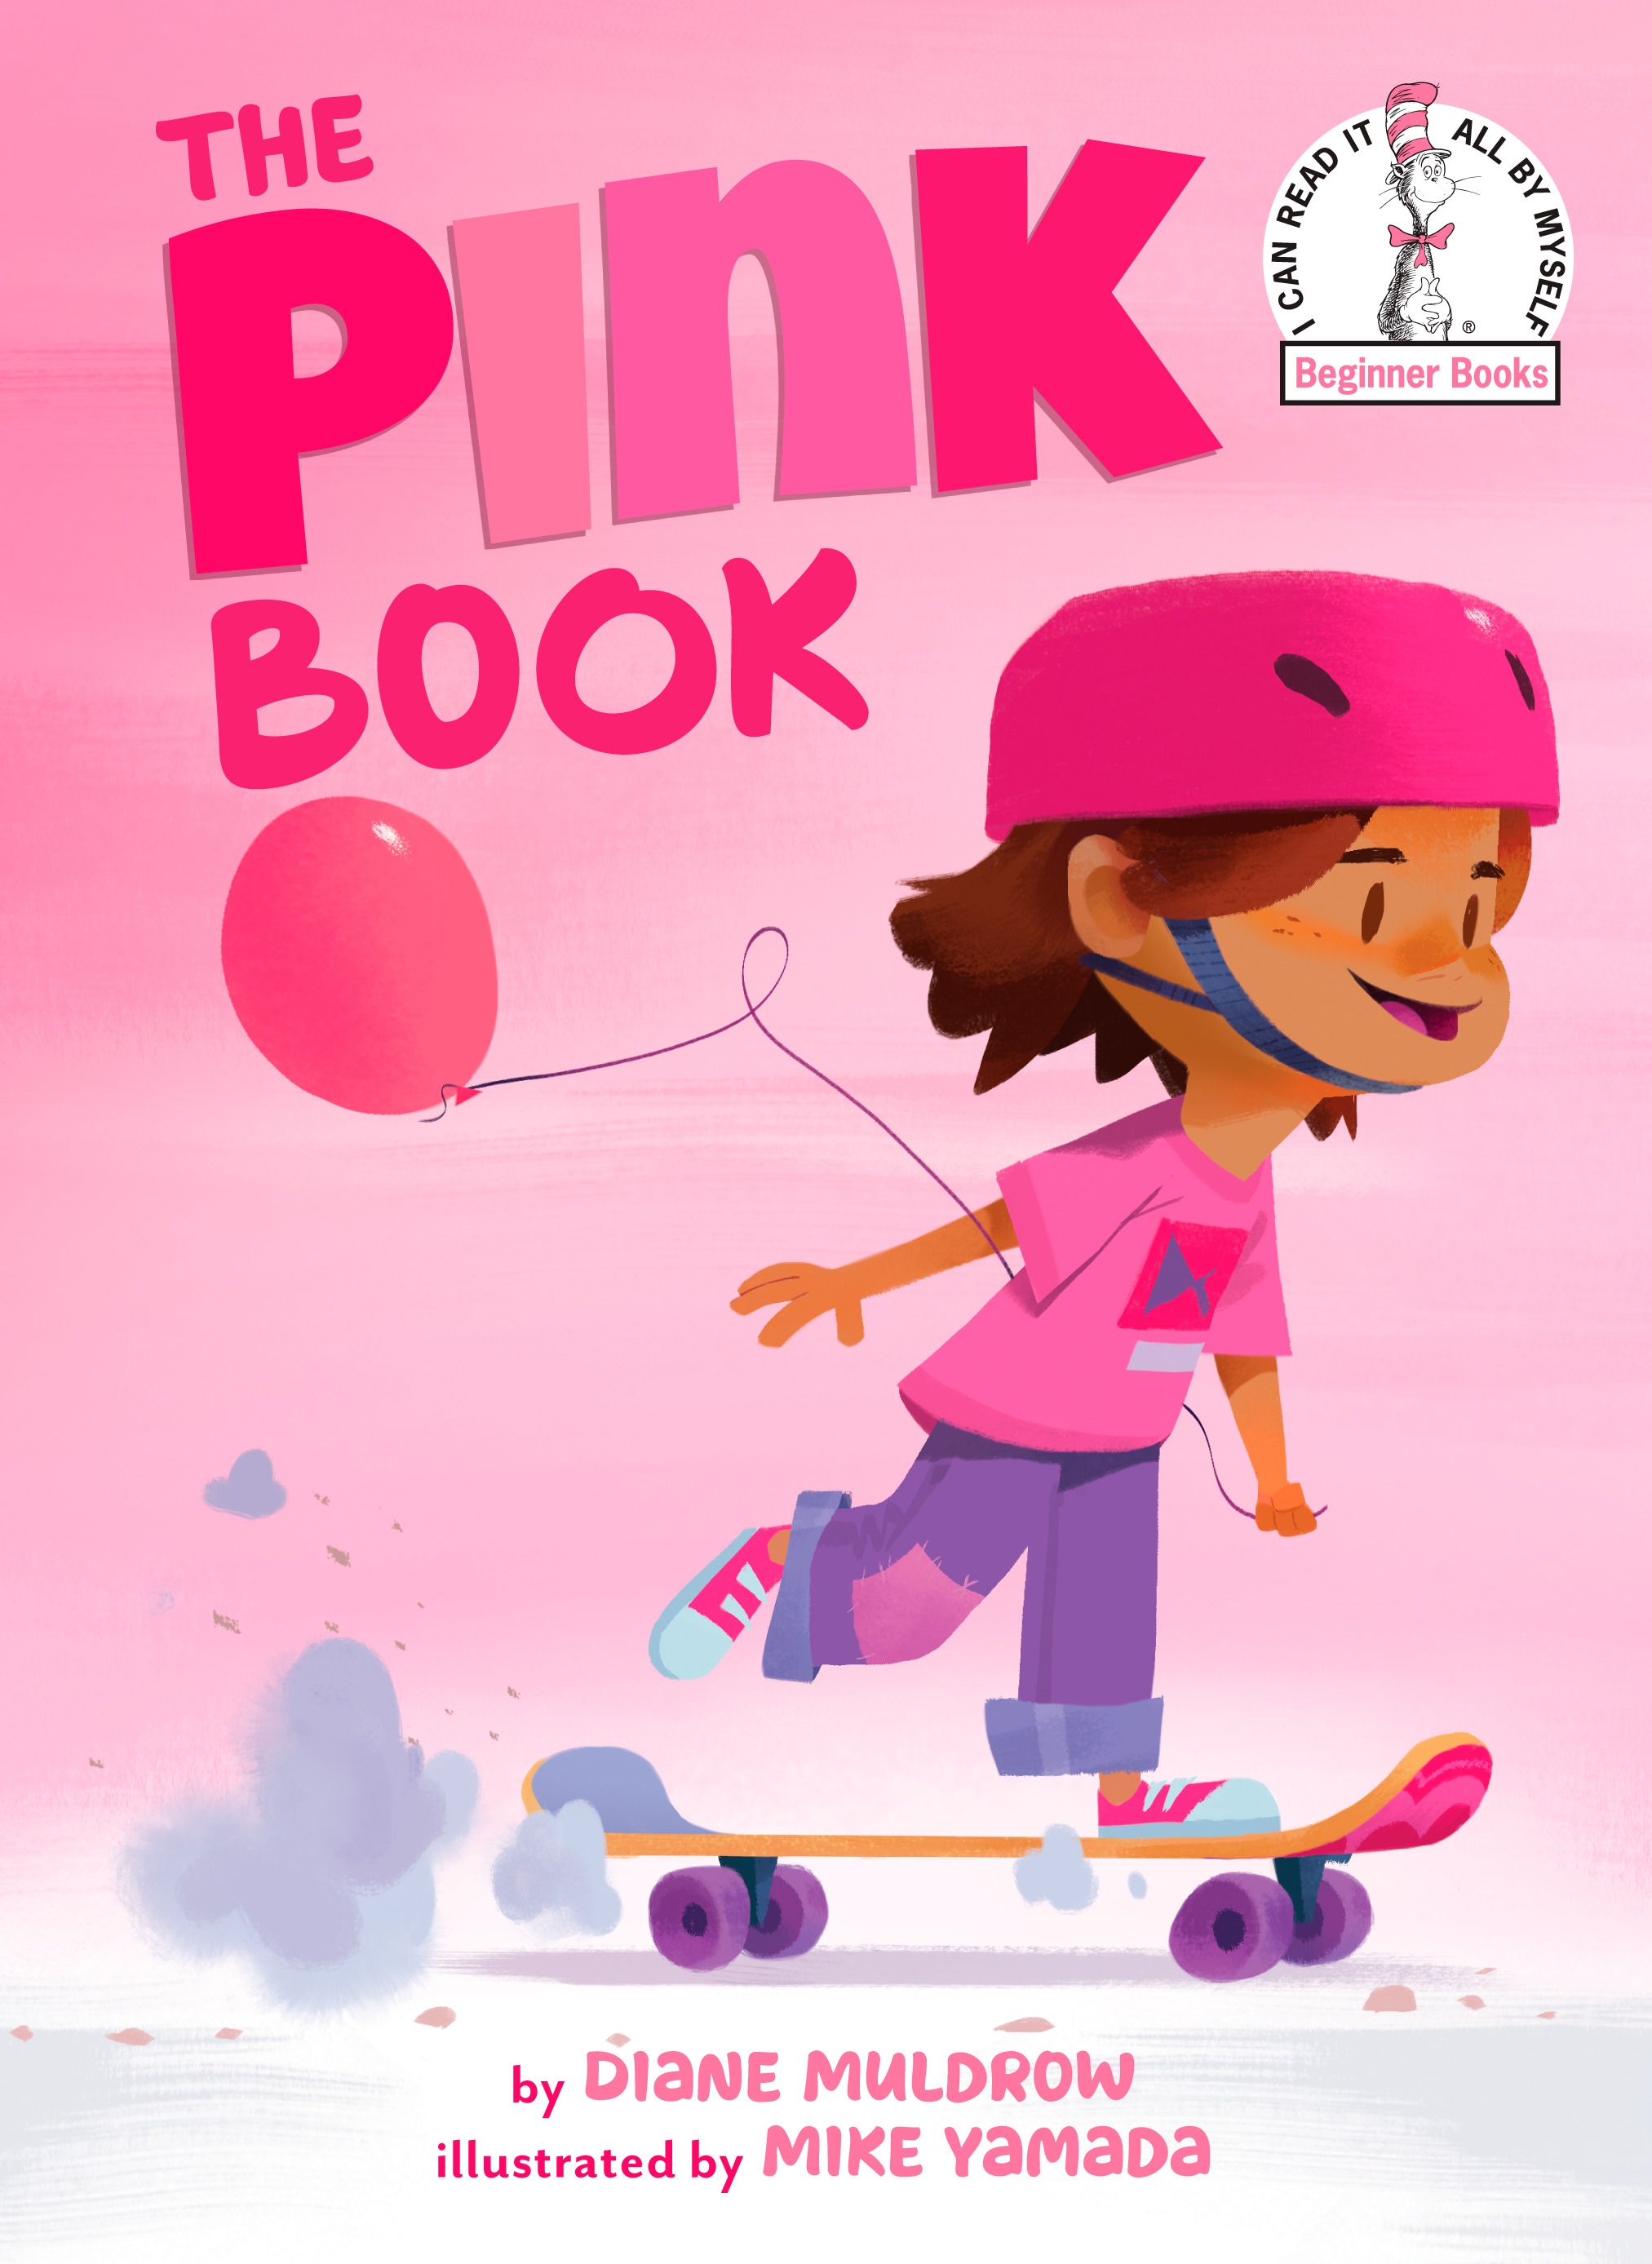 The Pink Book by Diane Muldrow Penguin Books New Zealand